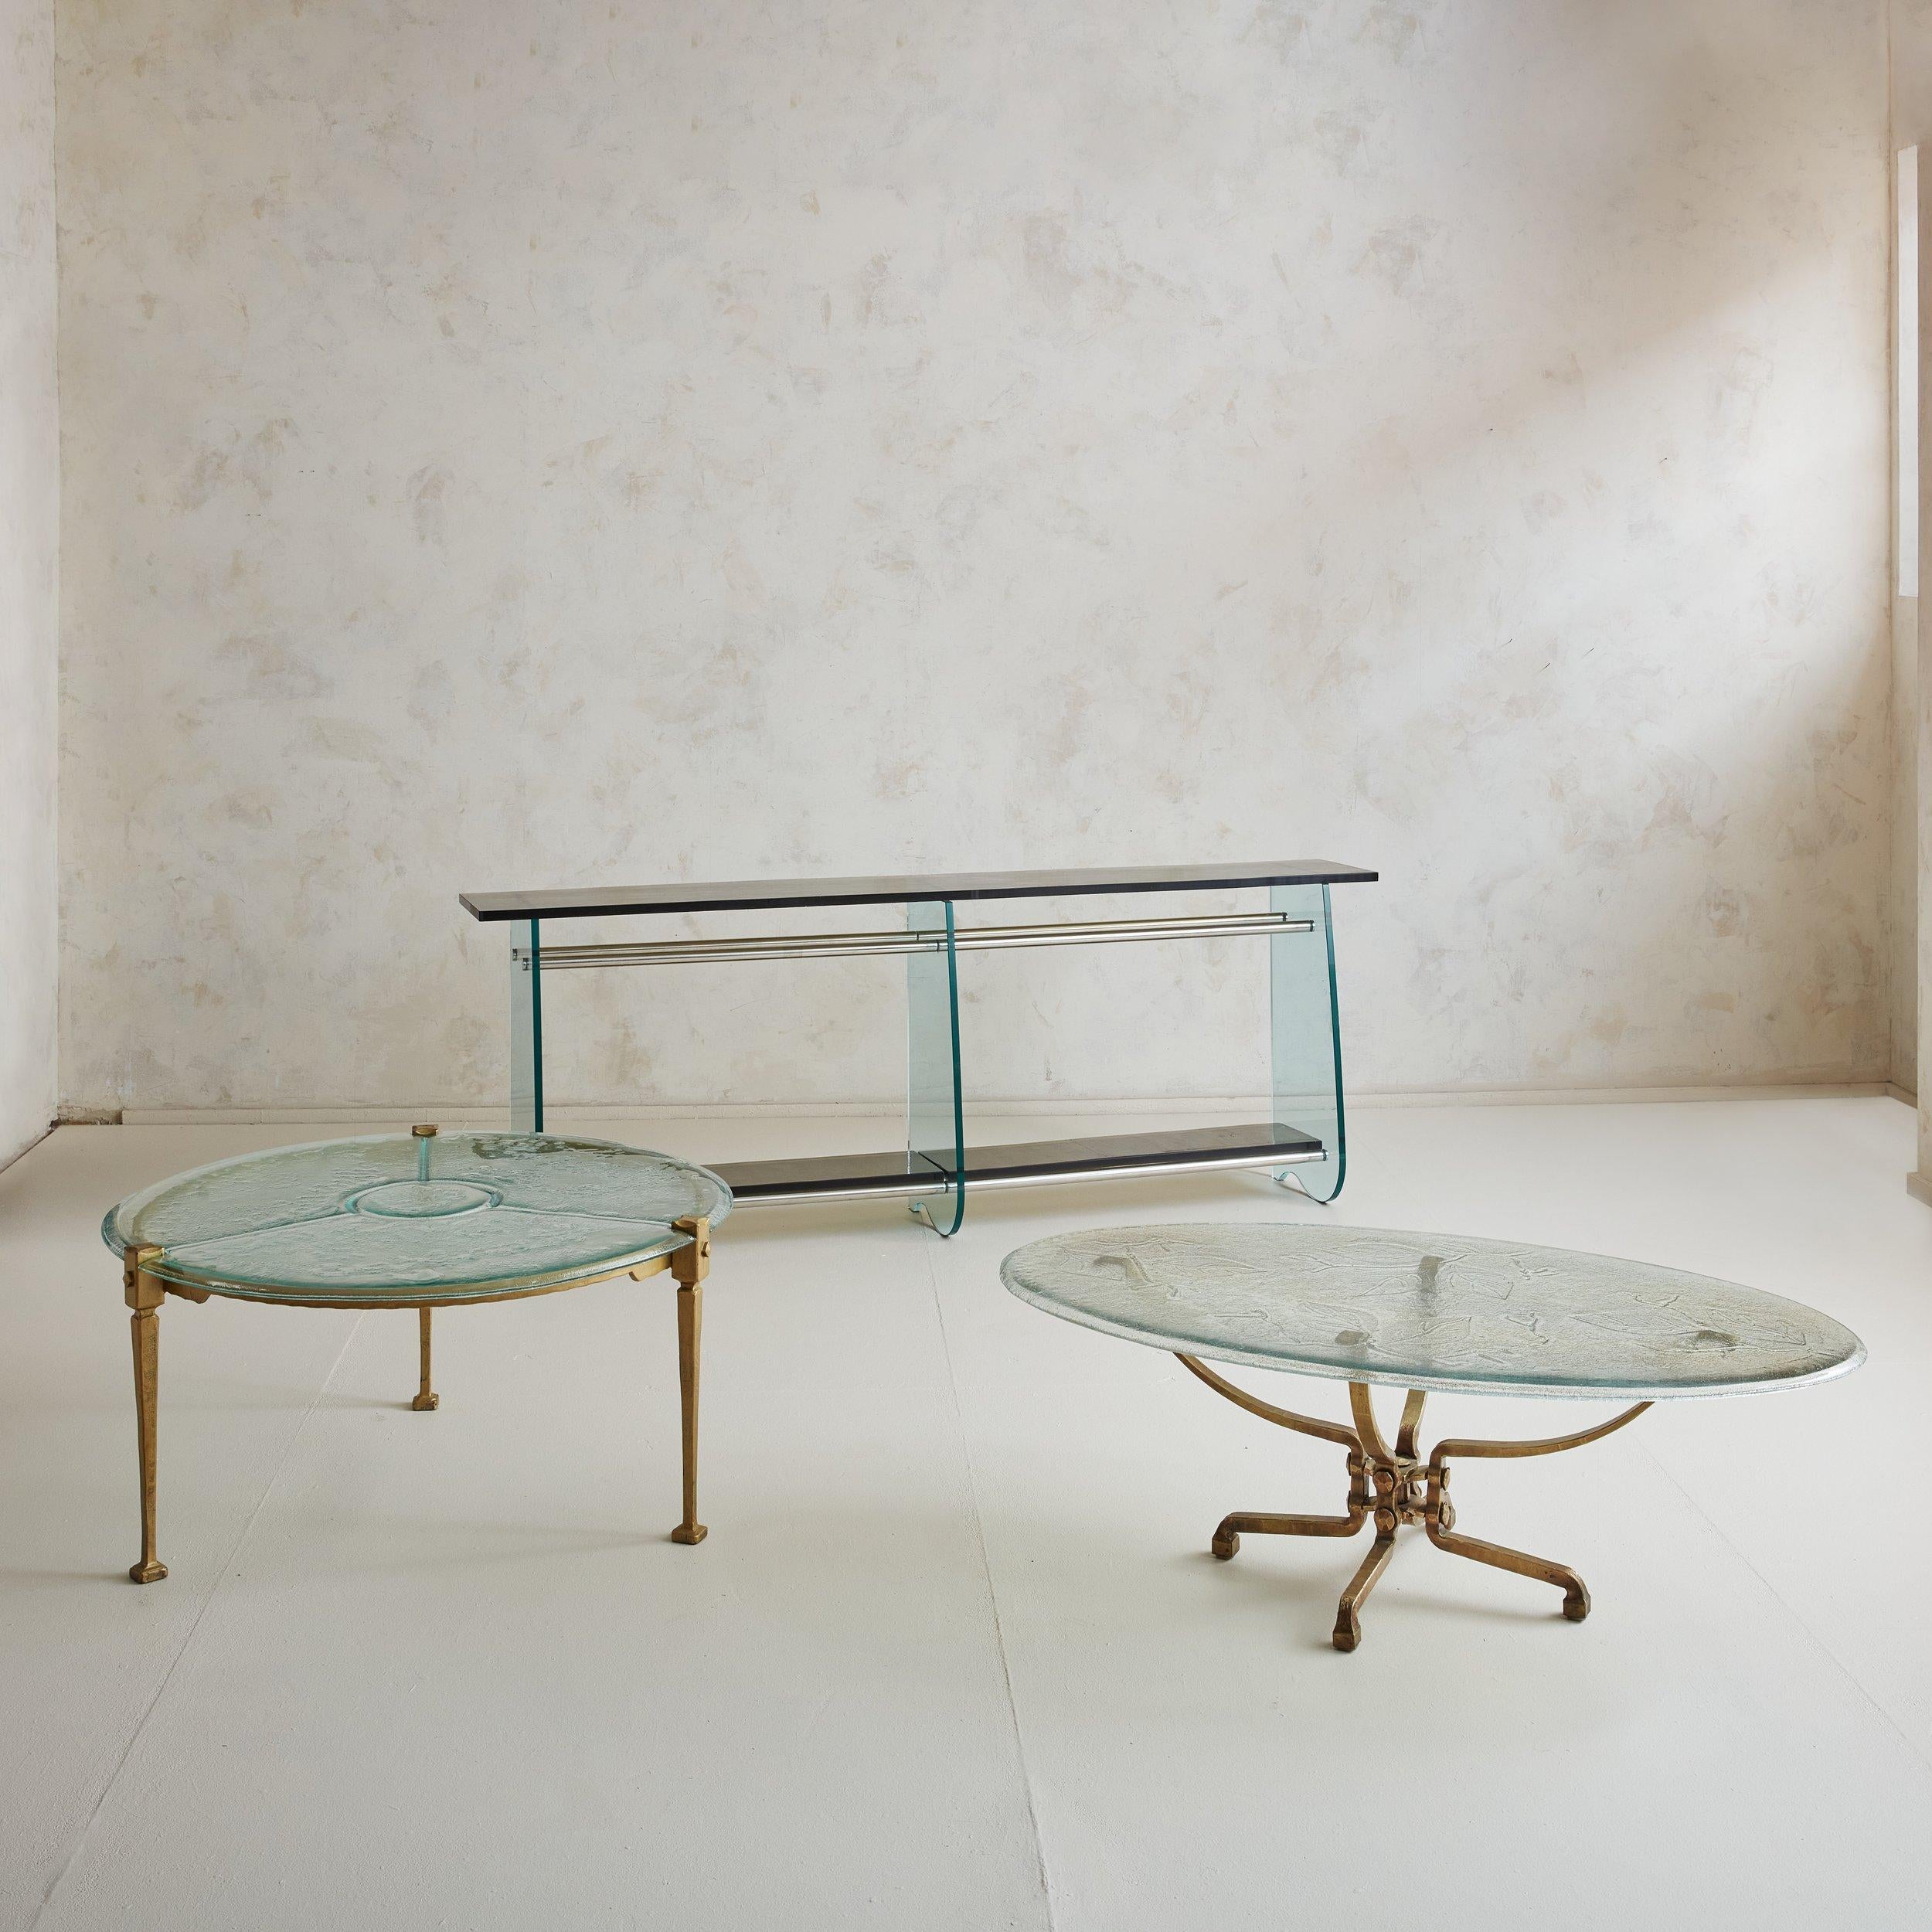 A rare brutalist coffee table featuring an etched bubble glass top and scrolled bronze base by Lothar Klute. Leaf and vine designs are artfully etched into the bubble glass and surrounded by flecks of orange and aqua. The rich texture of the glass